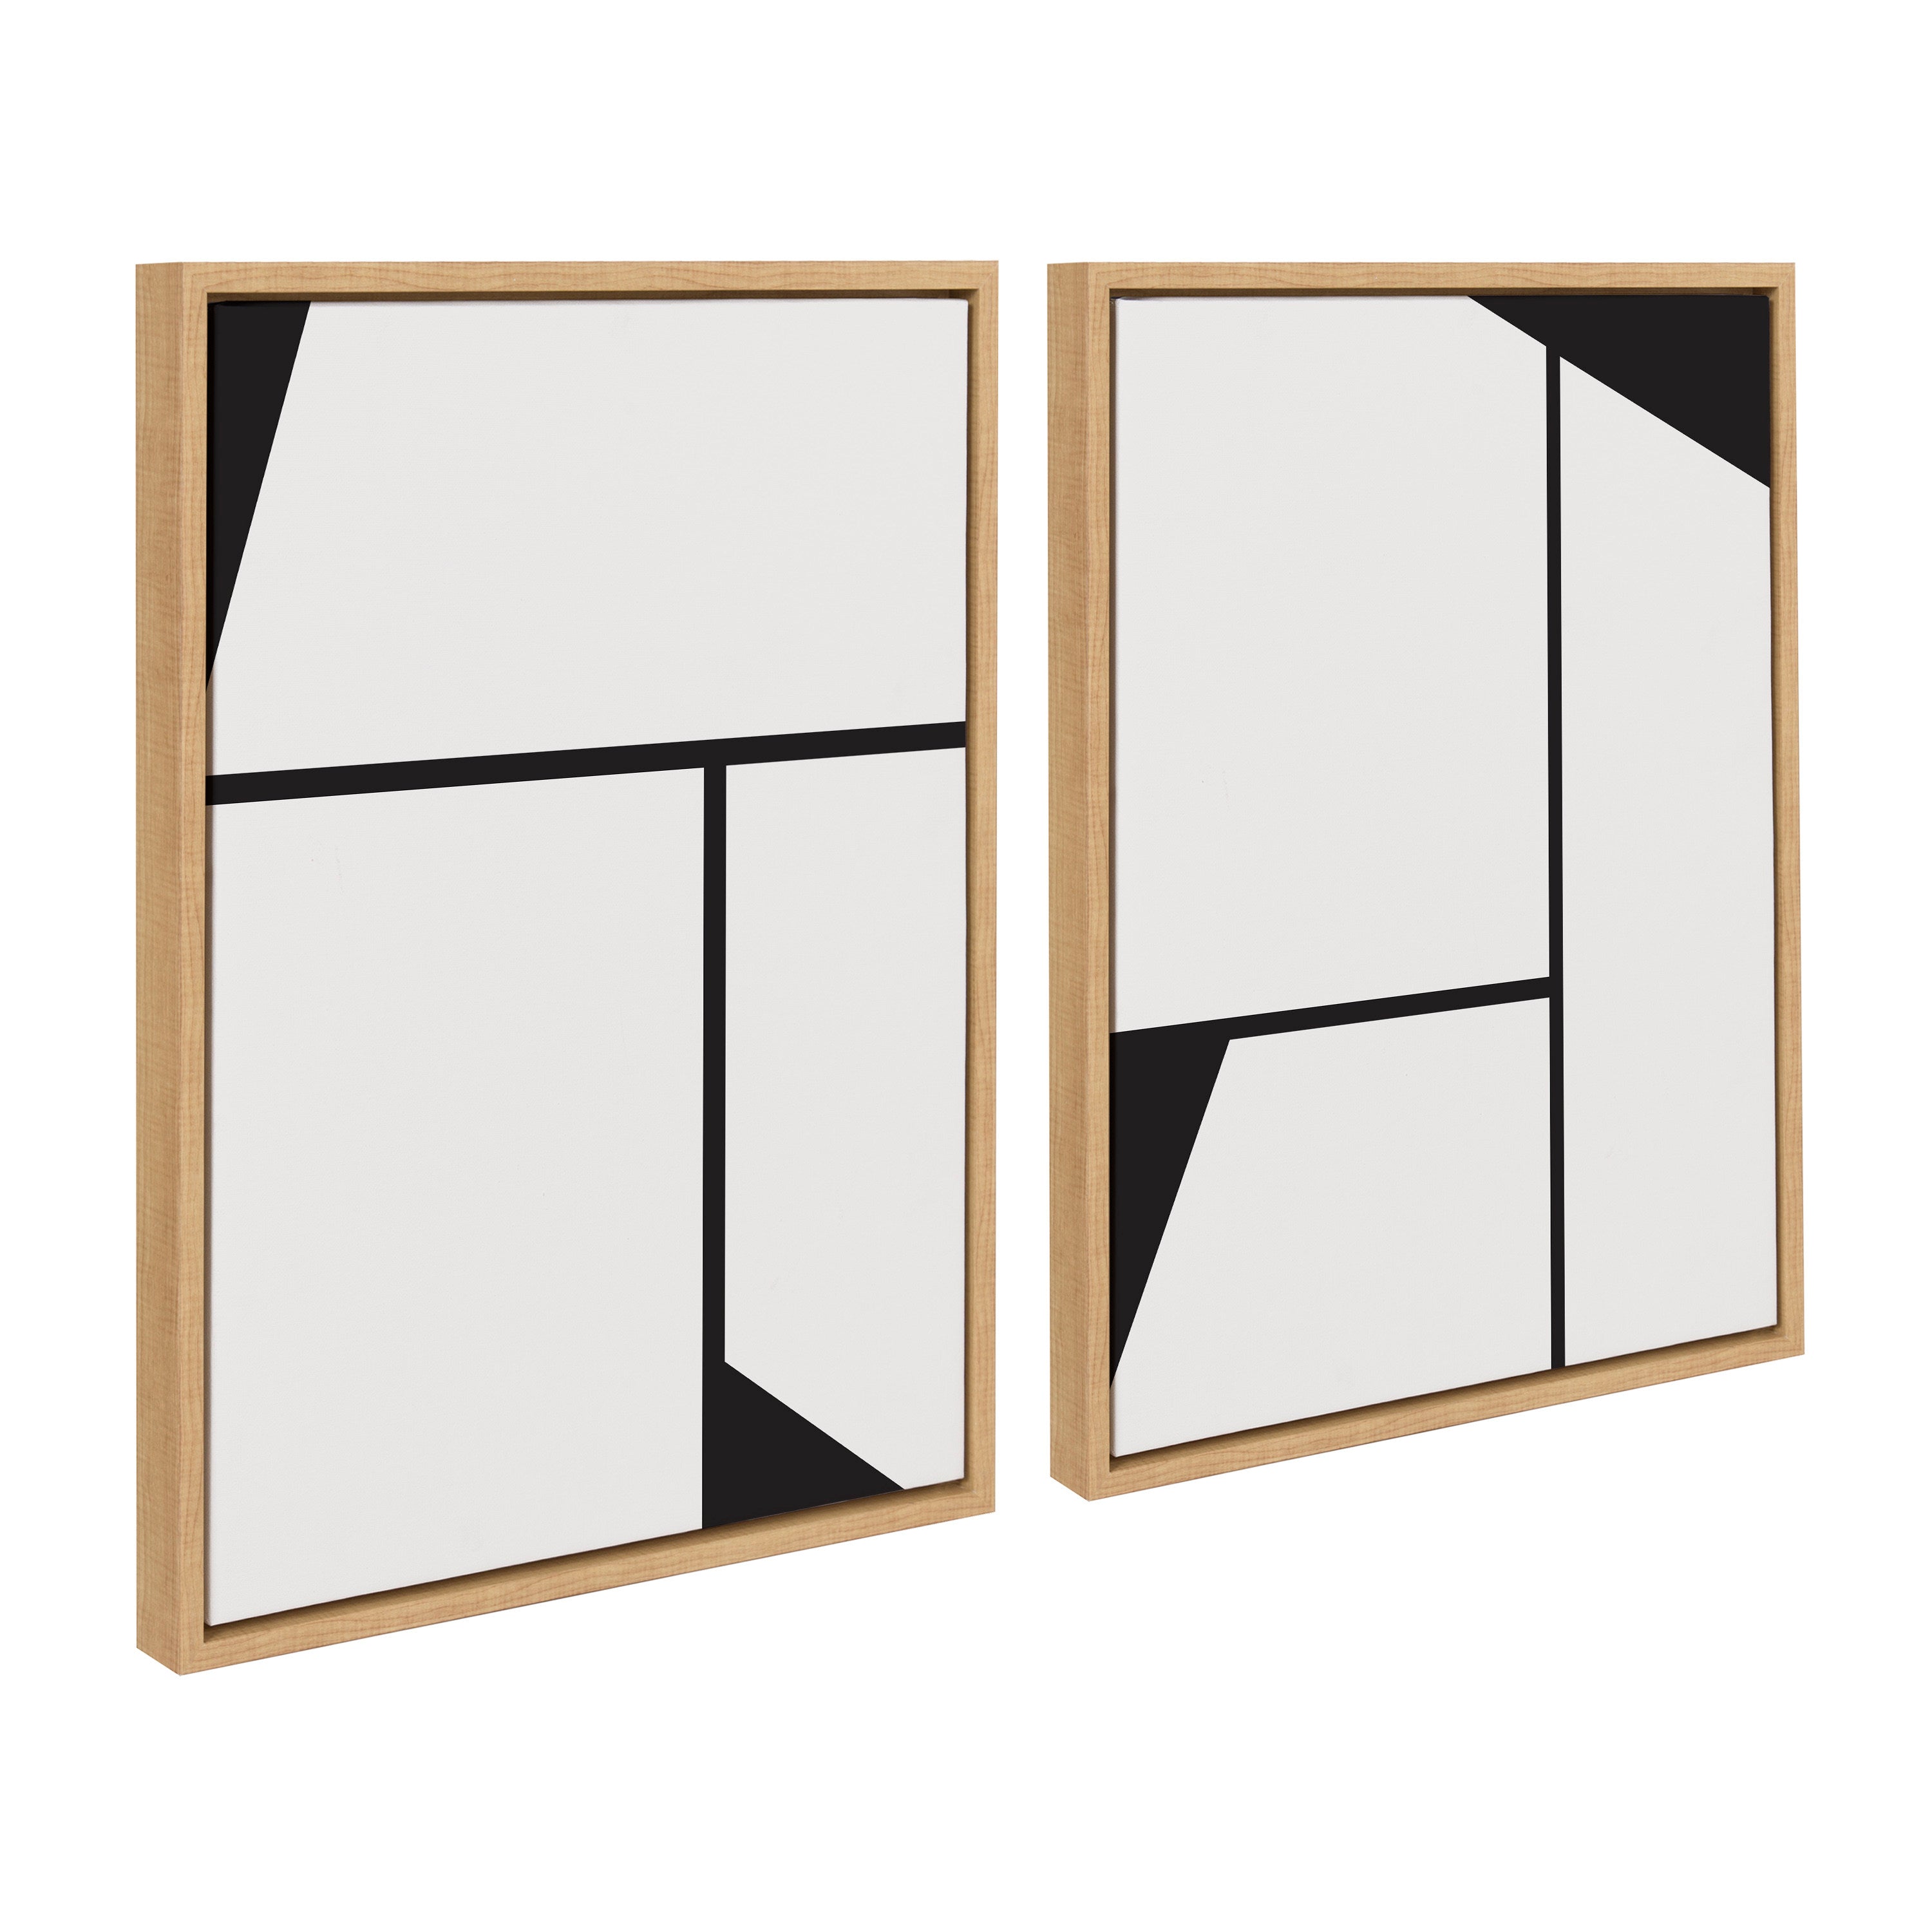 Sylvie Sleek Luxe Minimalist Black and White Abstract Framed Canvas Art Set by The Creative Bunch Studio